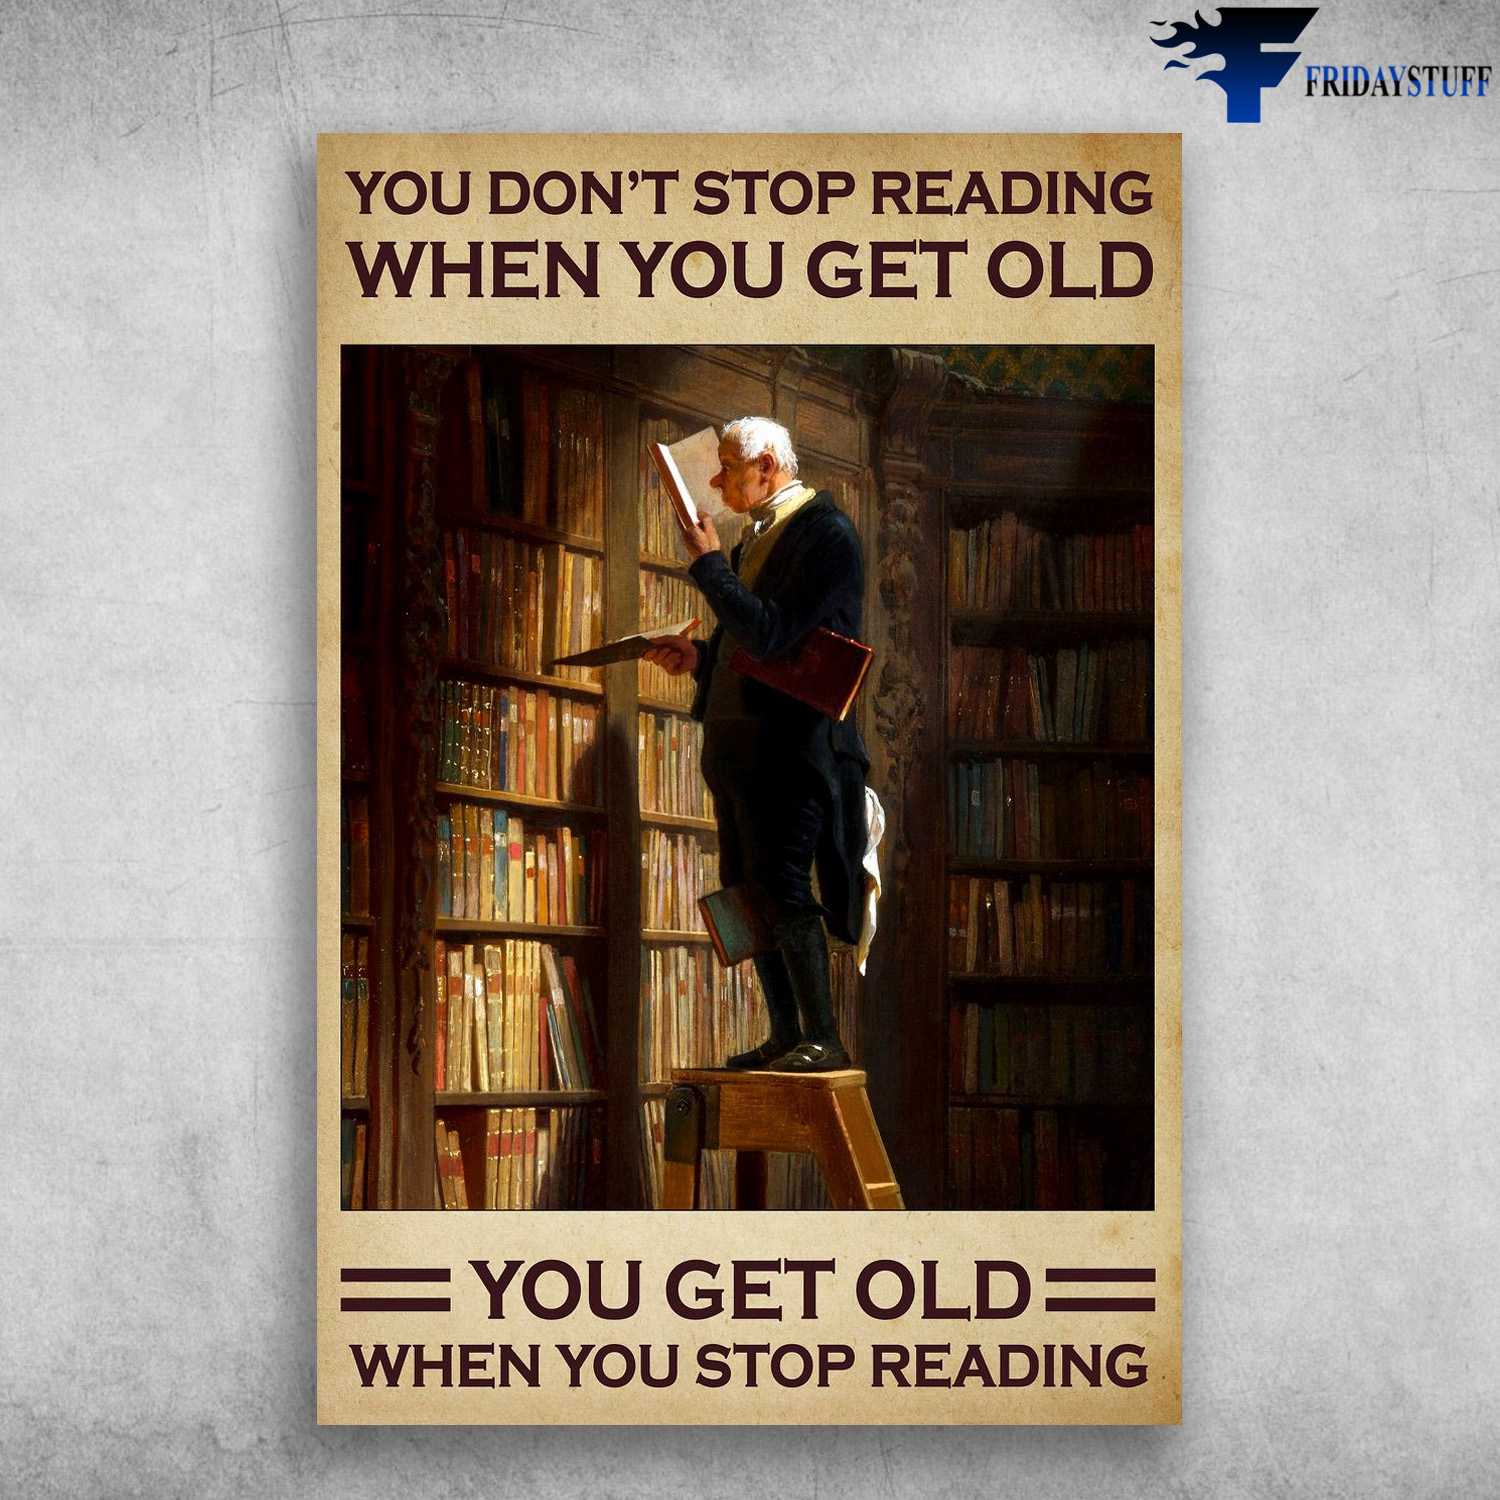 Old Man Loves Book, Library Poster, You Don't Stop Reading When You Get Old, You Get Old When You Stop Reading